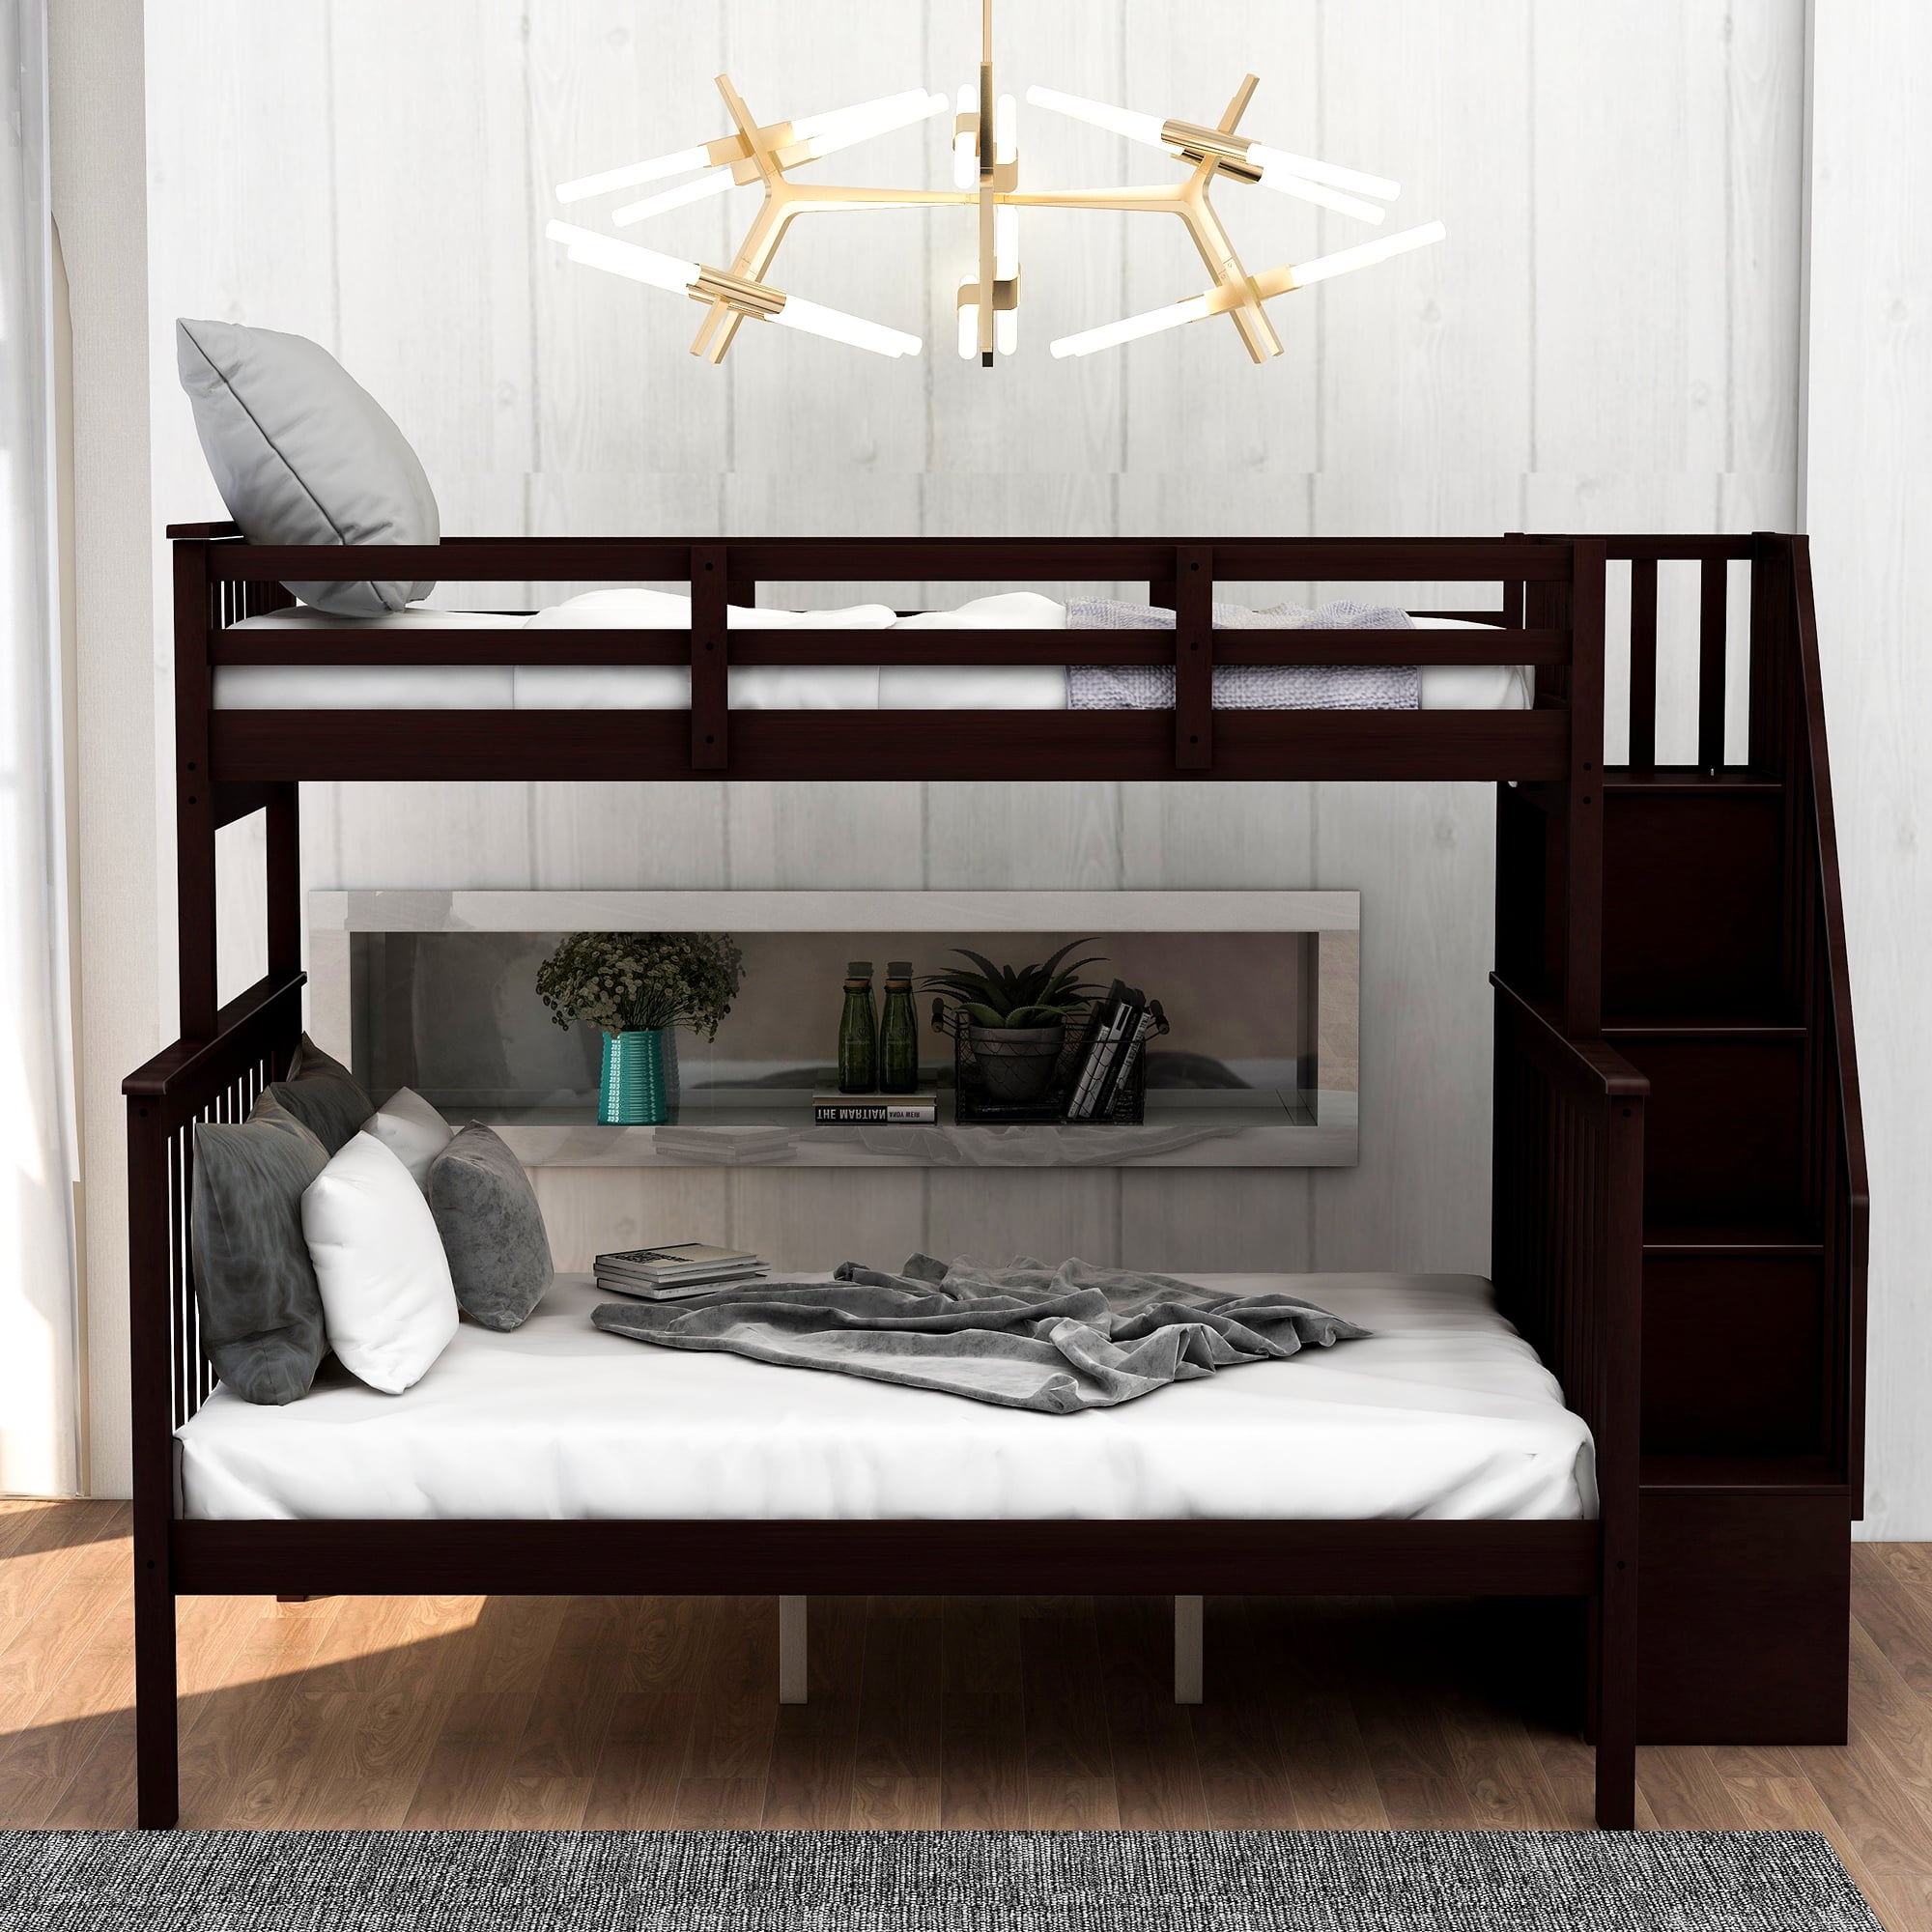 Wood Bunk Beds Twin Over Full Bed, Upper Bunk Bed